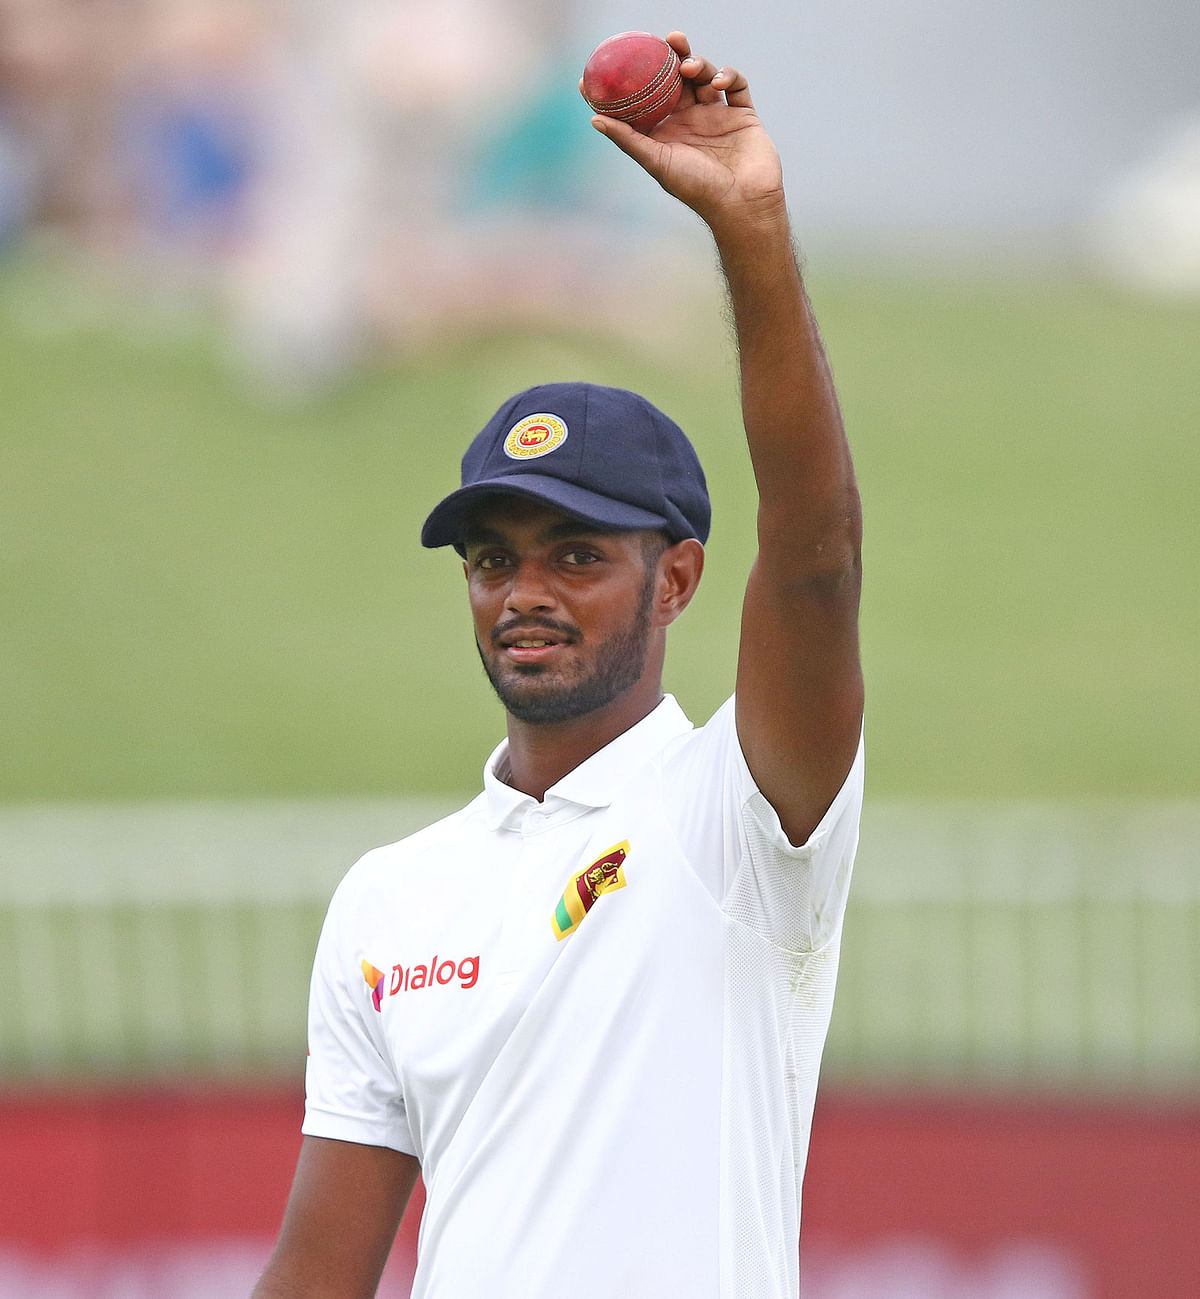 Sri Lanka`s Lasith Embuldeniya celebrates his 5 wicket haul during the third day of the first Cricket Test between South Africa and Sri Lanka at the Kingsmead Stadium in Durban. Photo: AFP